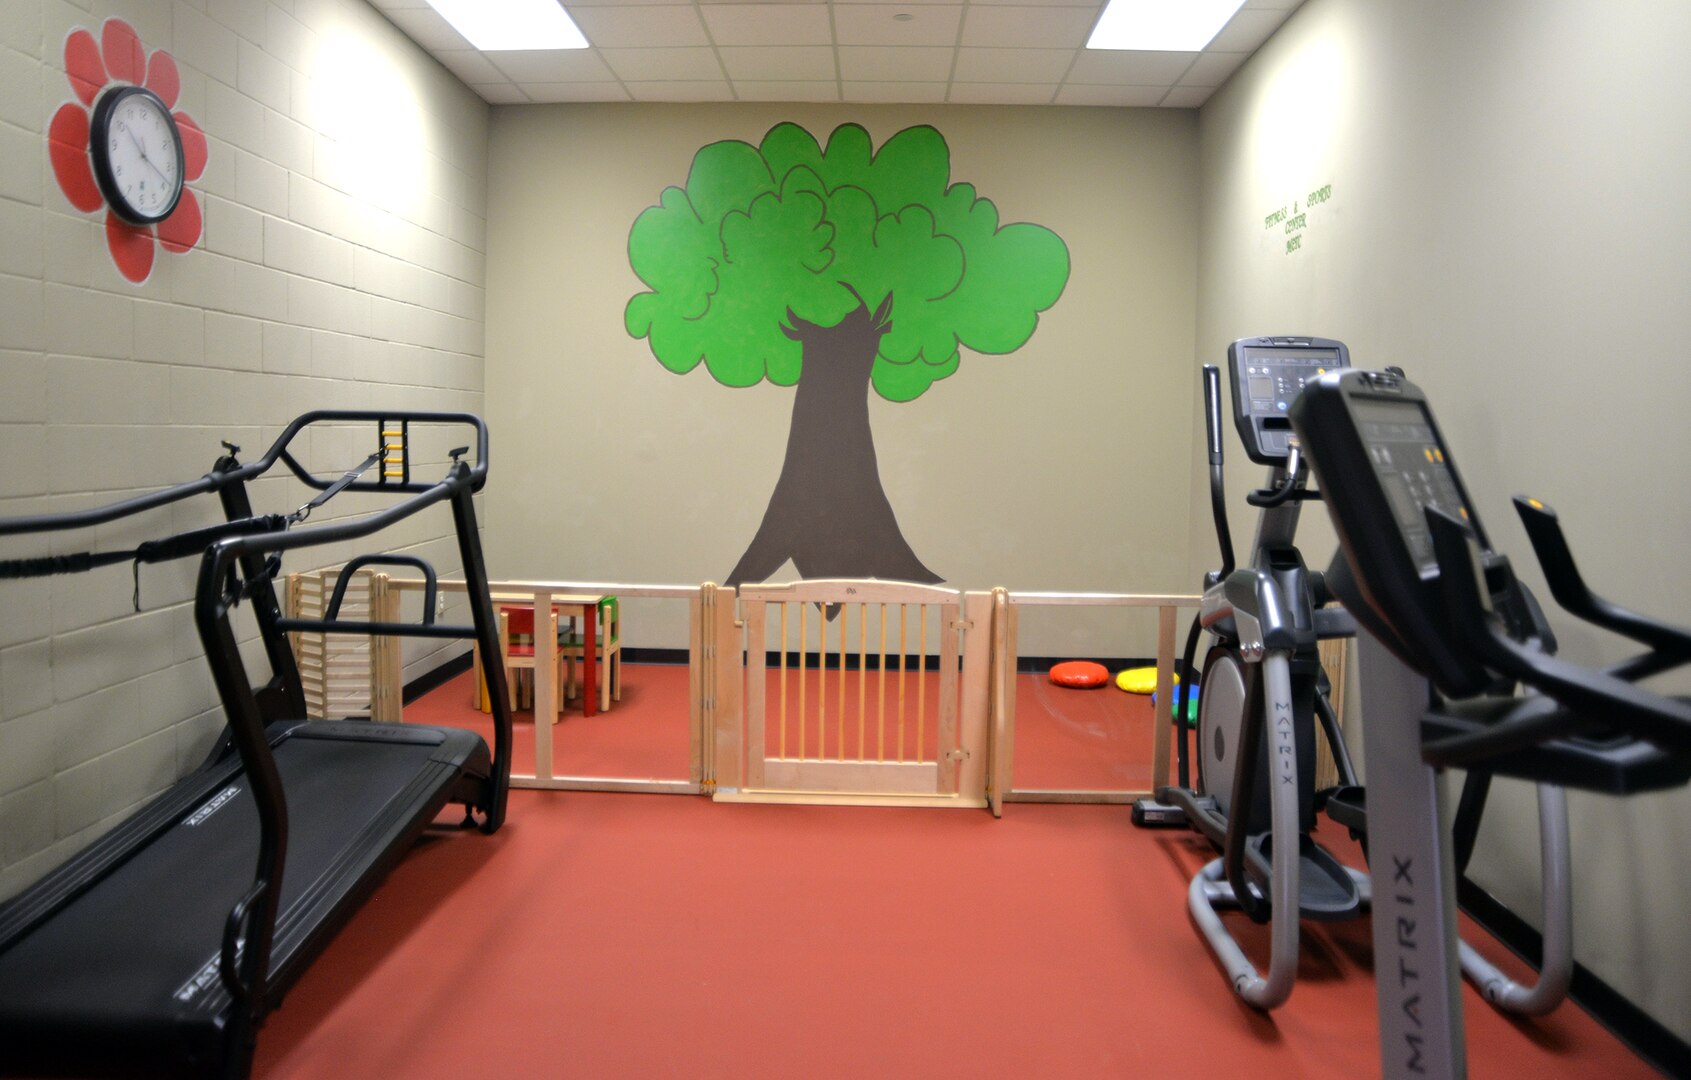 The new Parent Child Area at the Medical Education and Training Campus Fitness Center at Joint Base San Antonio-Fort Sam Houston includes an enclosed play area and small table for children and a workout area for parents, allowing parents to work out while watching their children at the same time. The official opening of the Parent Child Area is June 3.